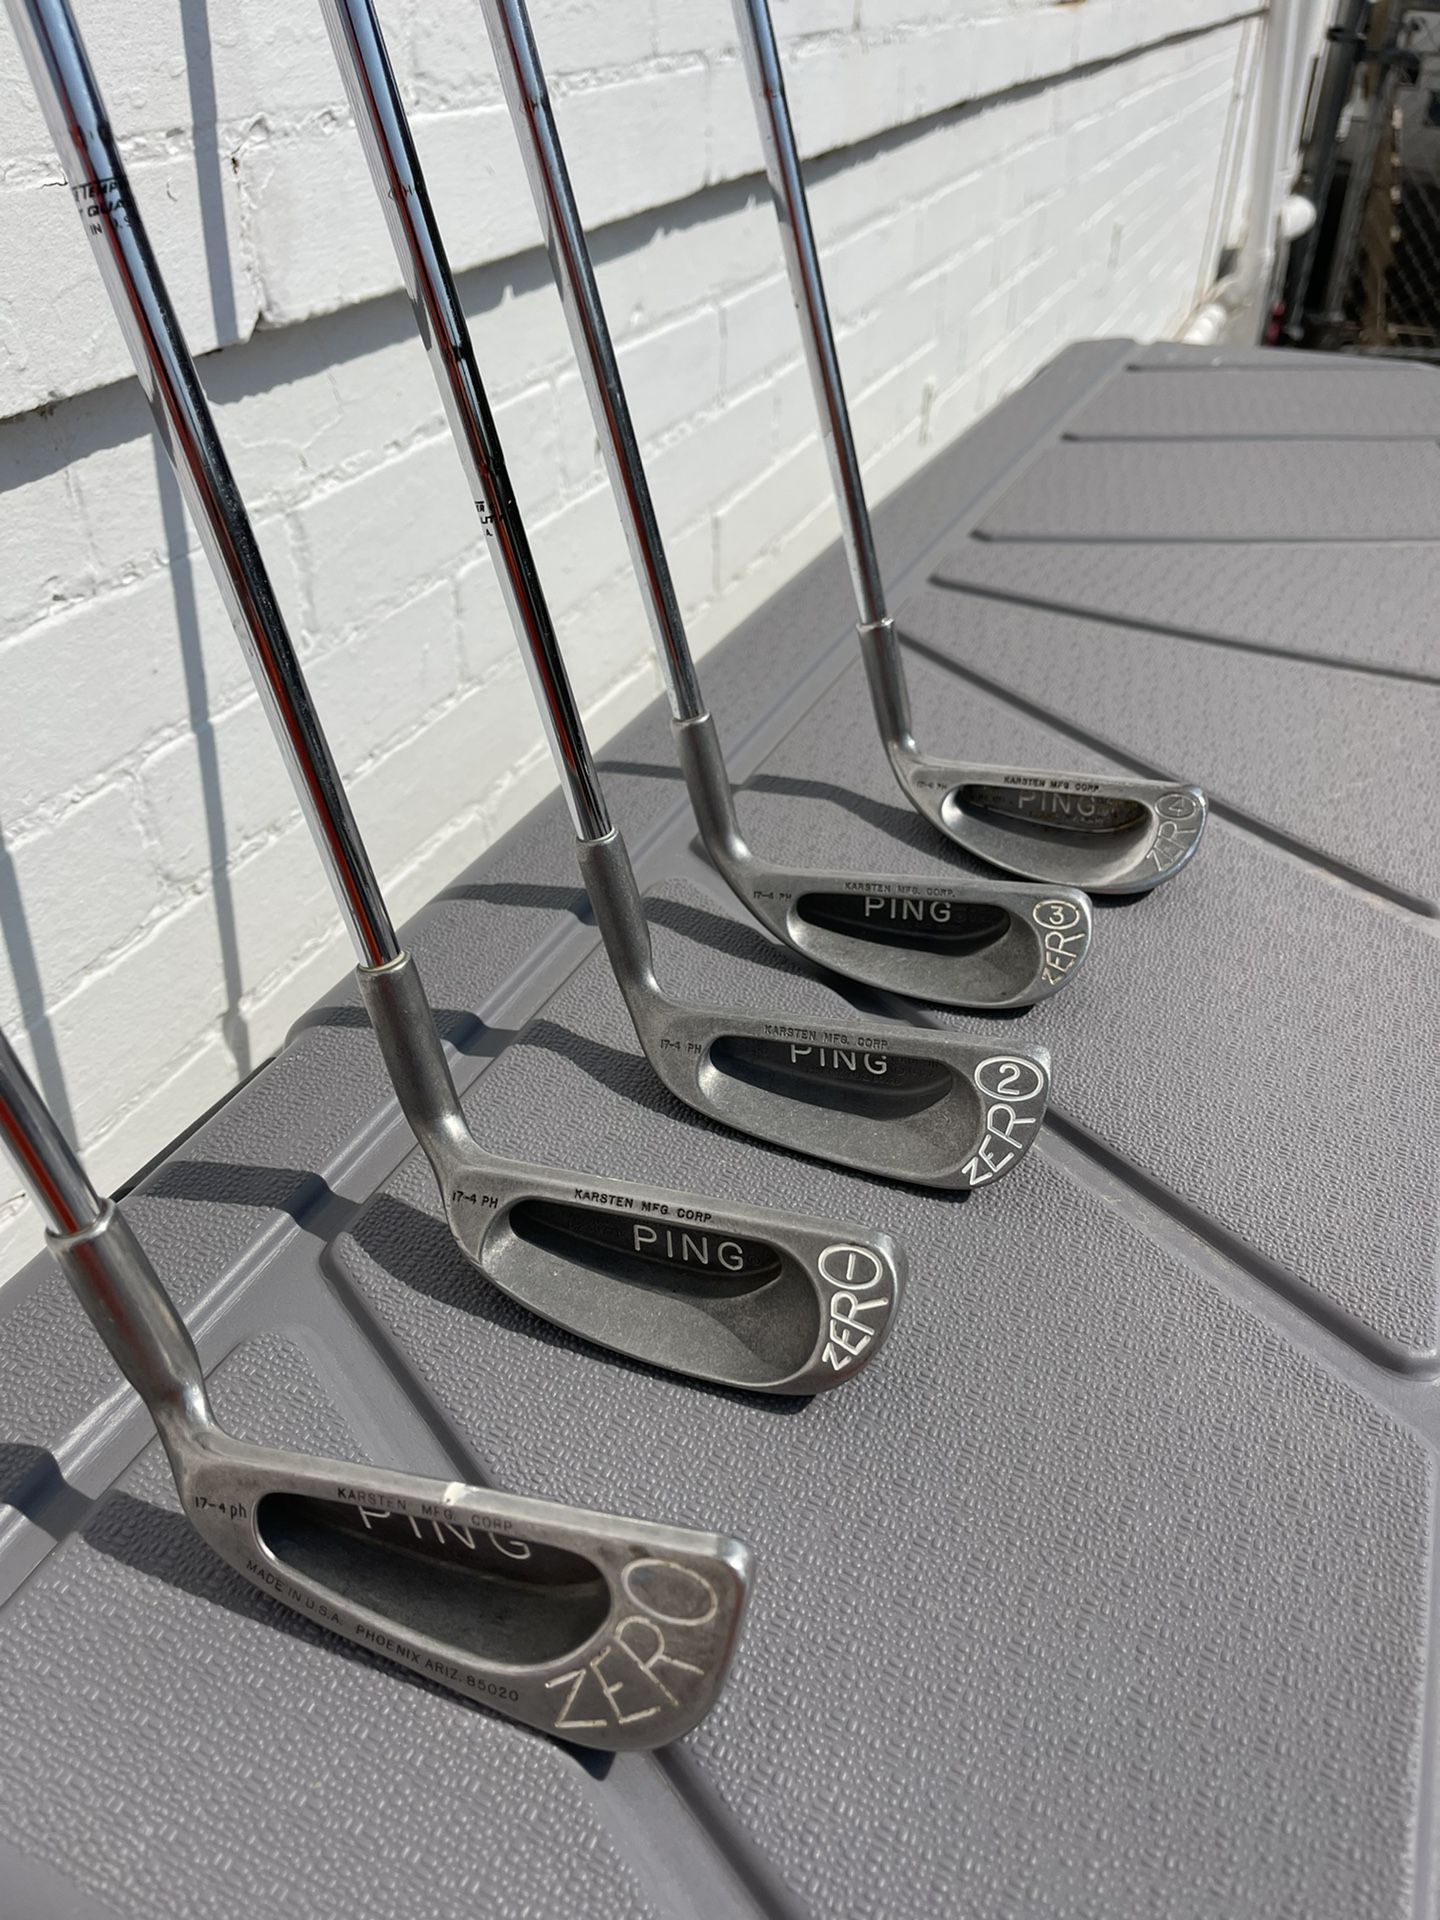 Collectible Ping “Zero” Putters